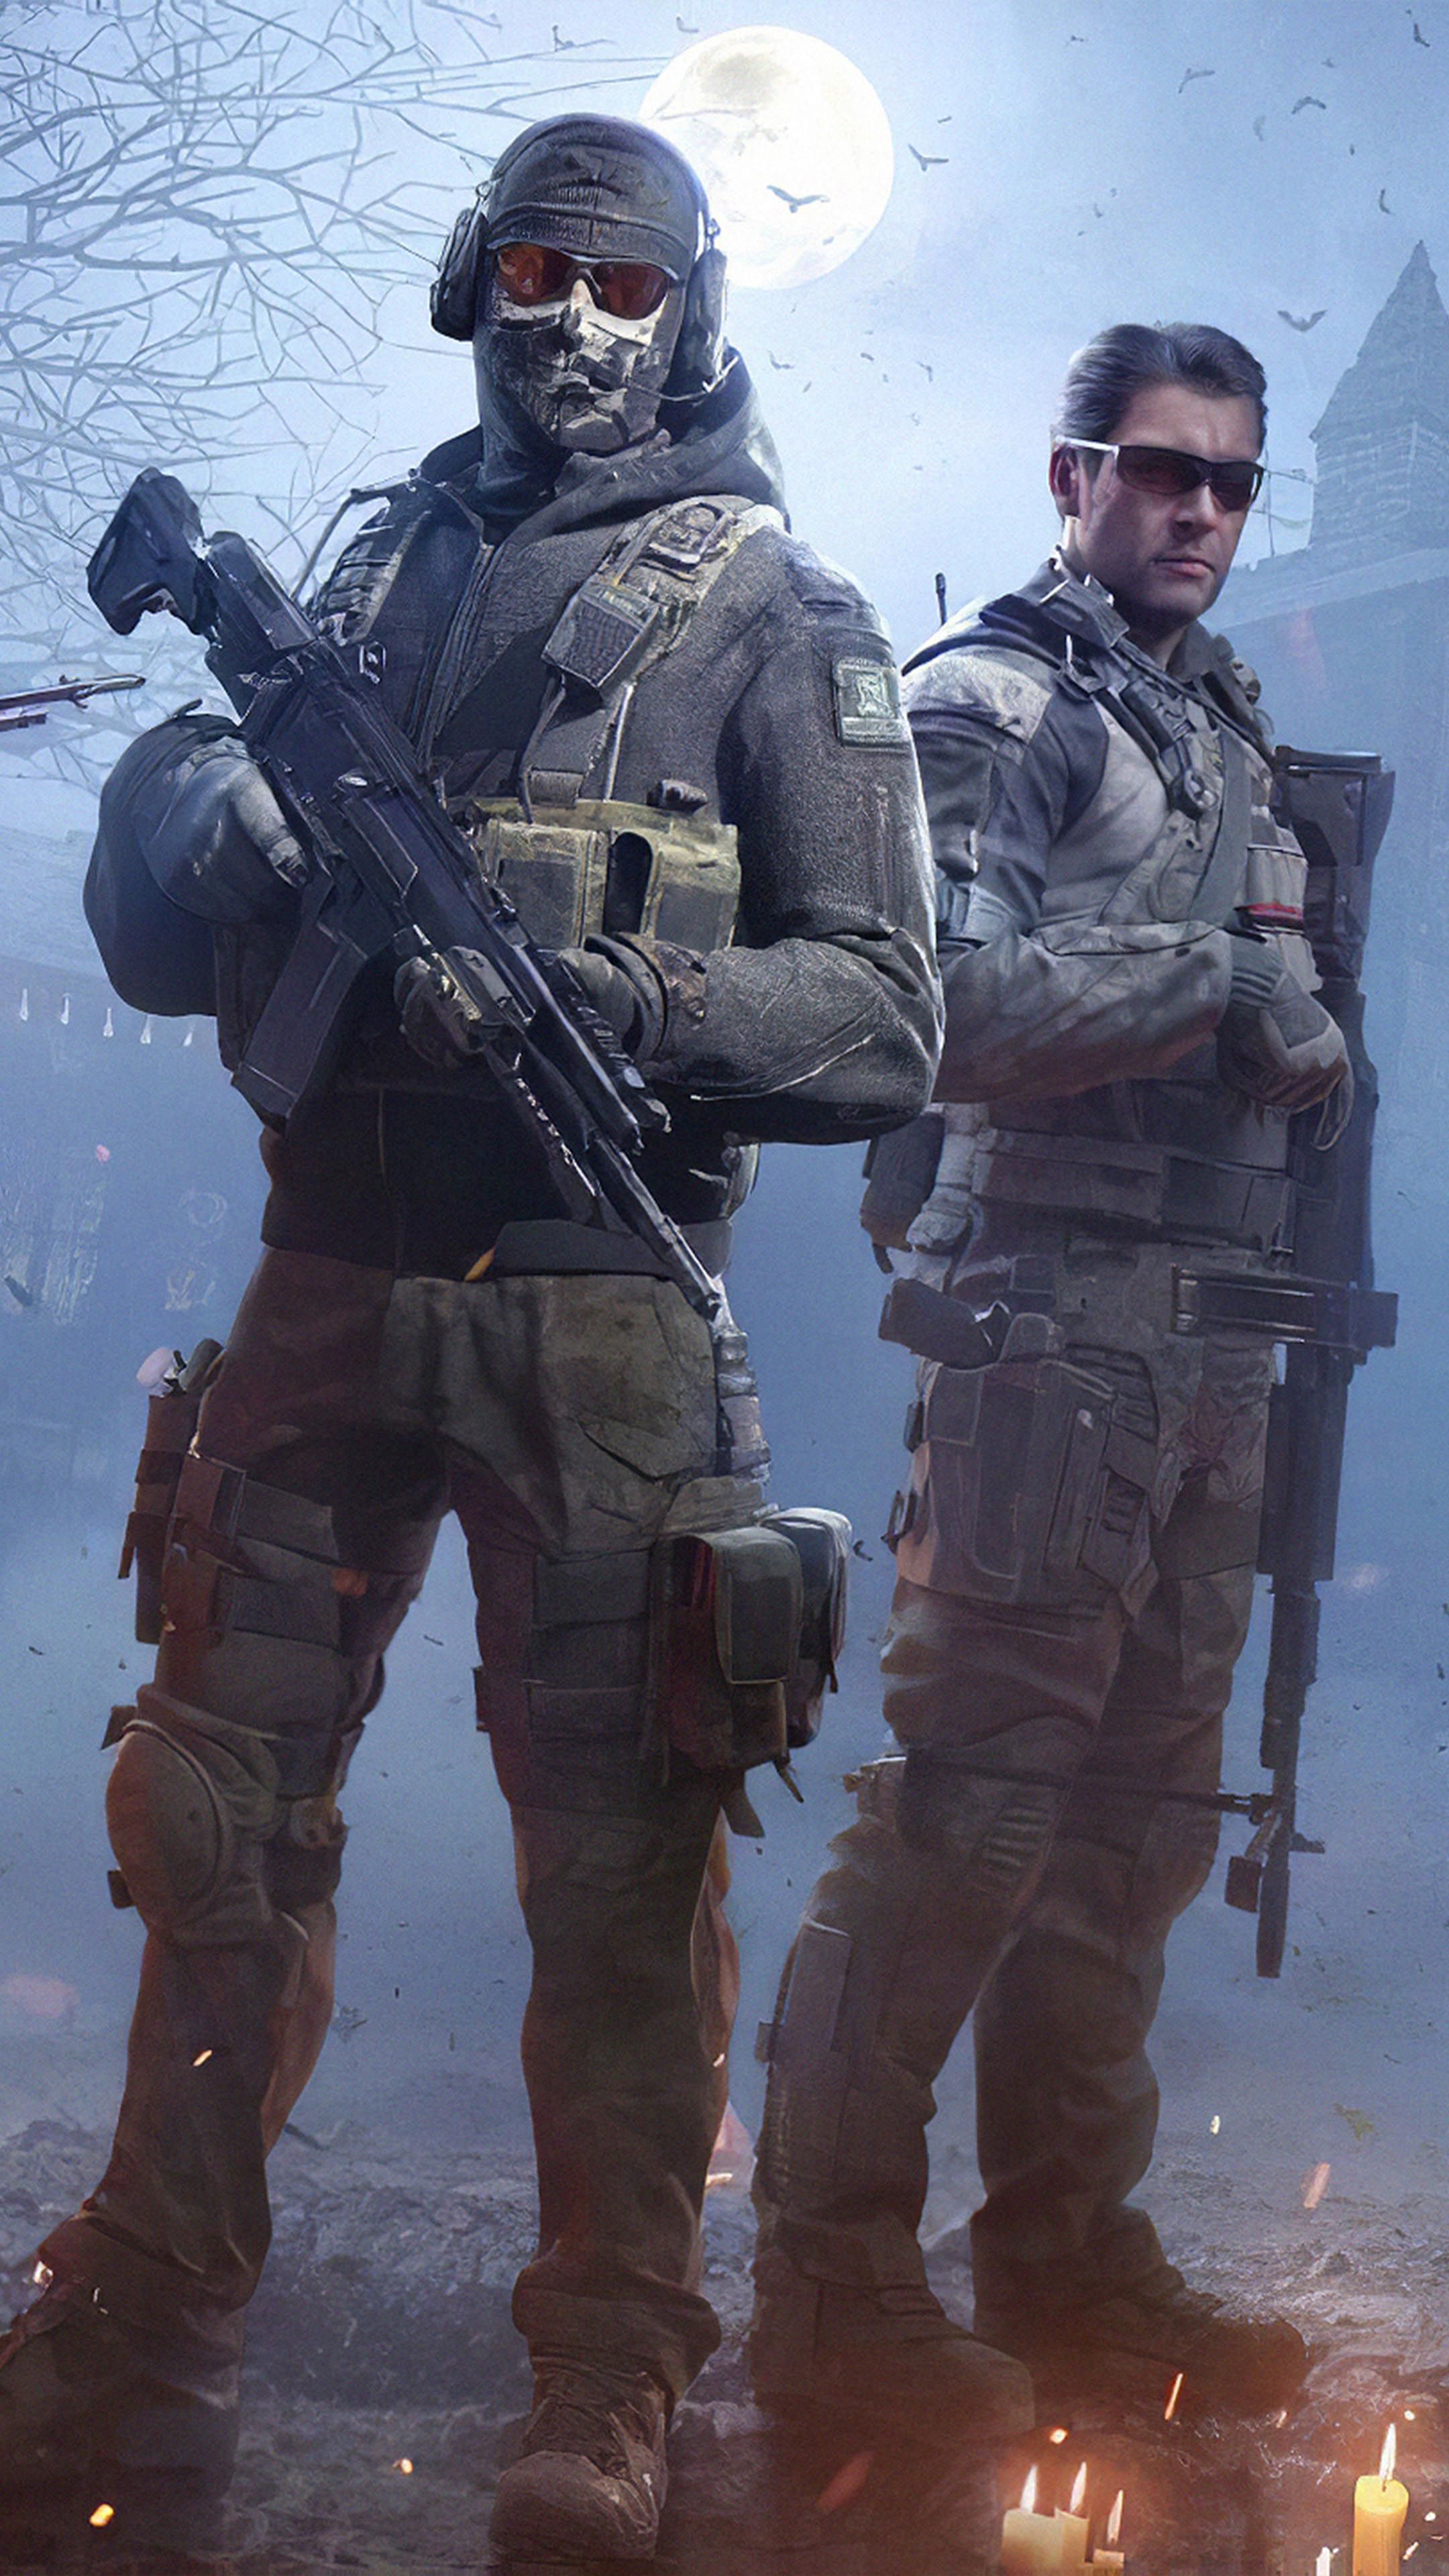 Squad Call of Duty Mobile 4K Ultra HD Mobile Wallpaper. Call of duty black, Call off duty, Call of duty ghosts